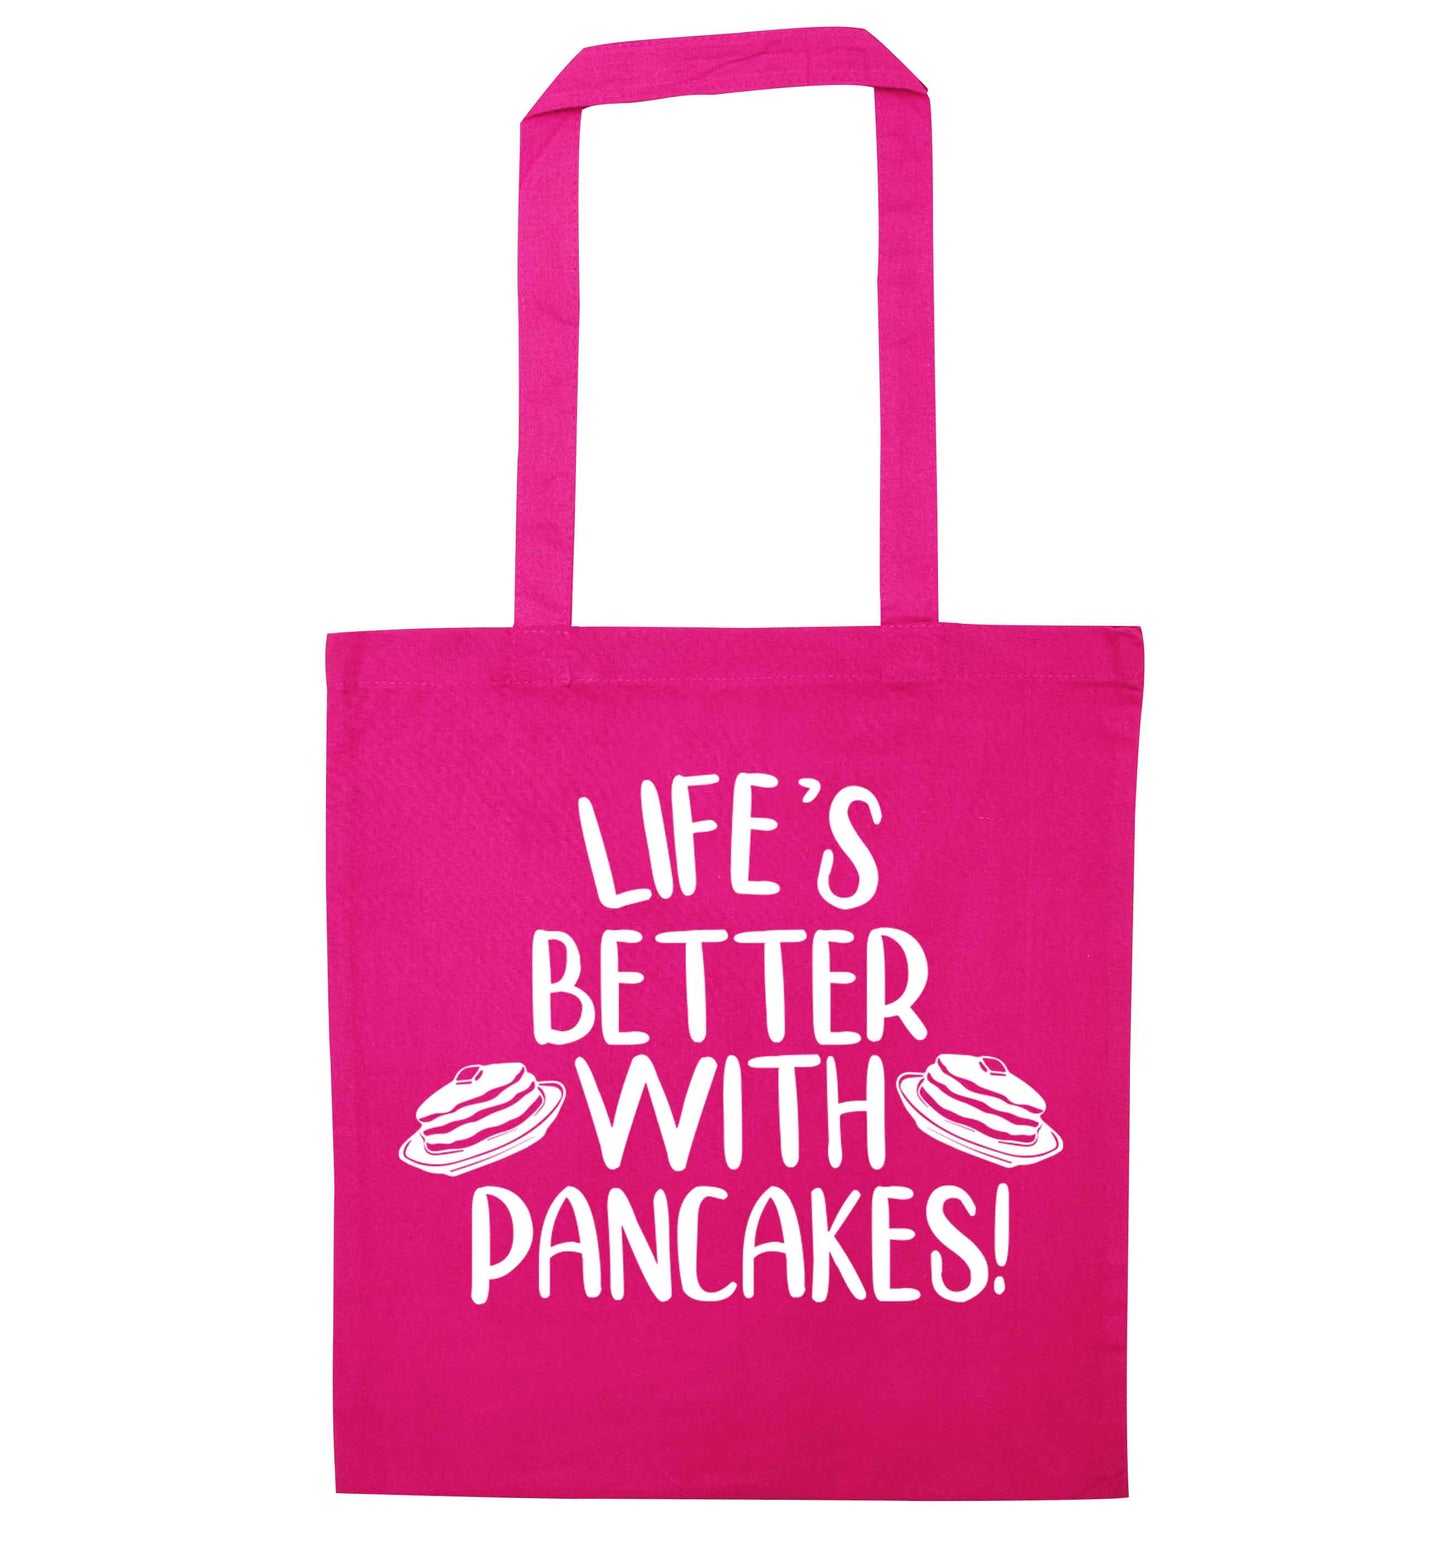 Life's better with pancakes pink tote bag